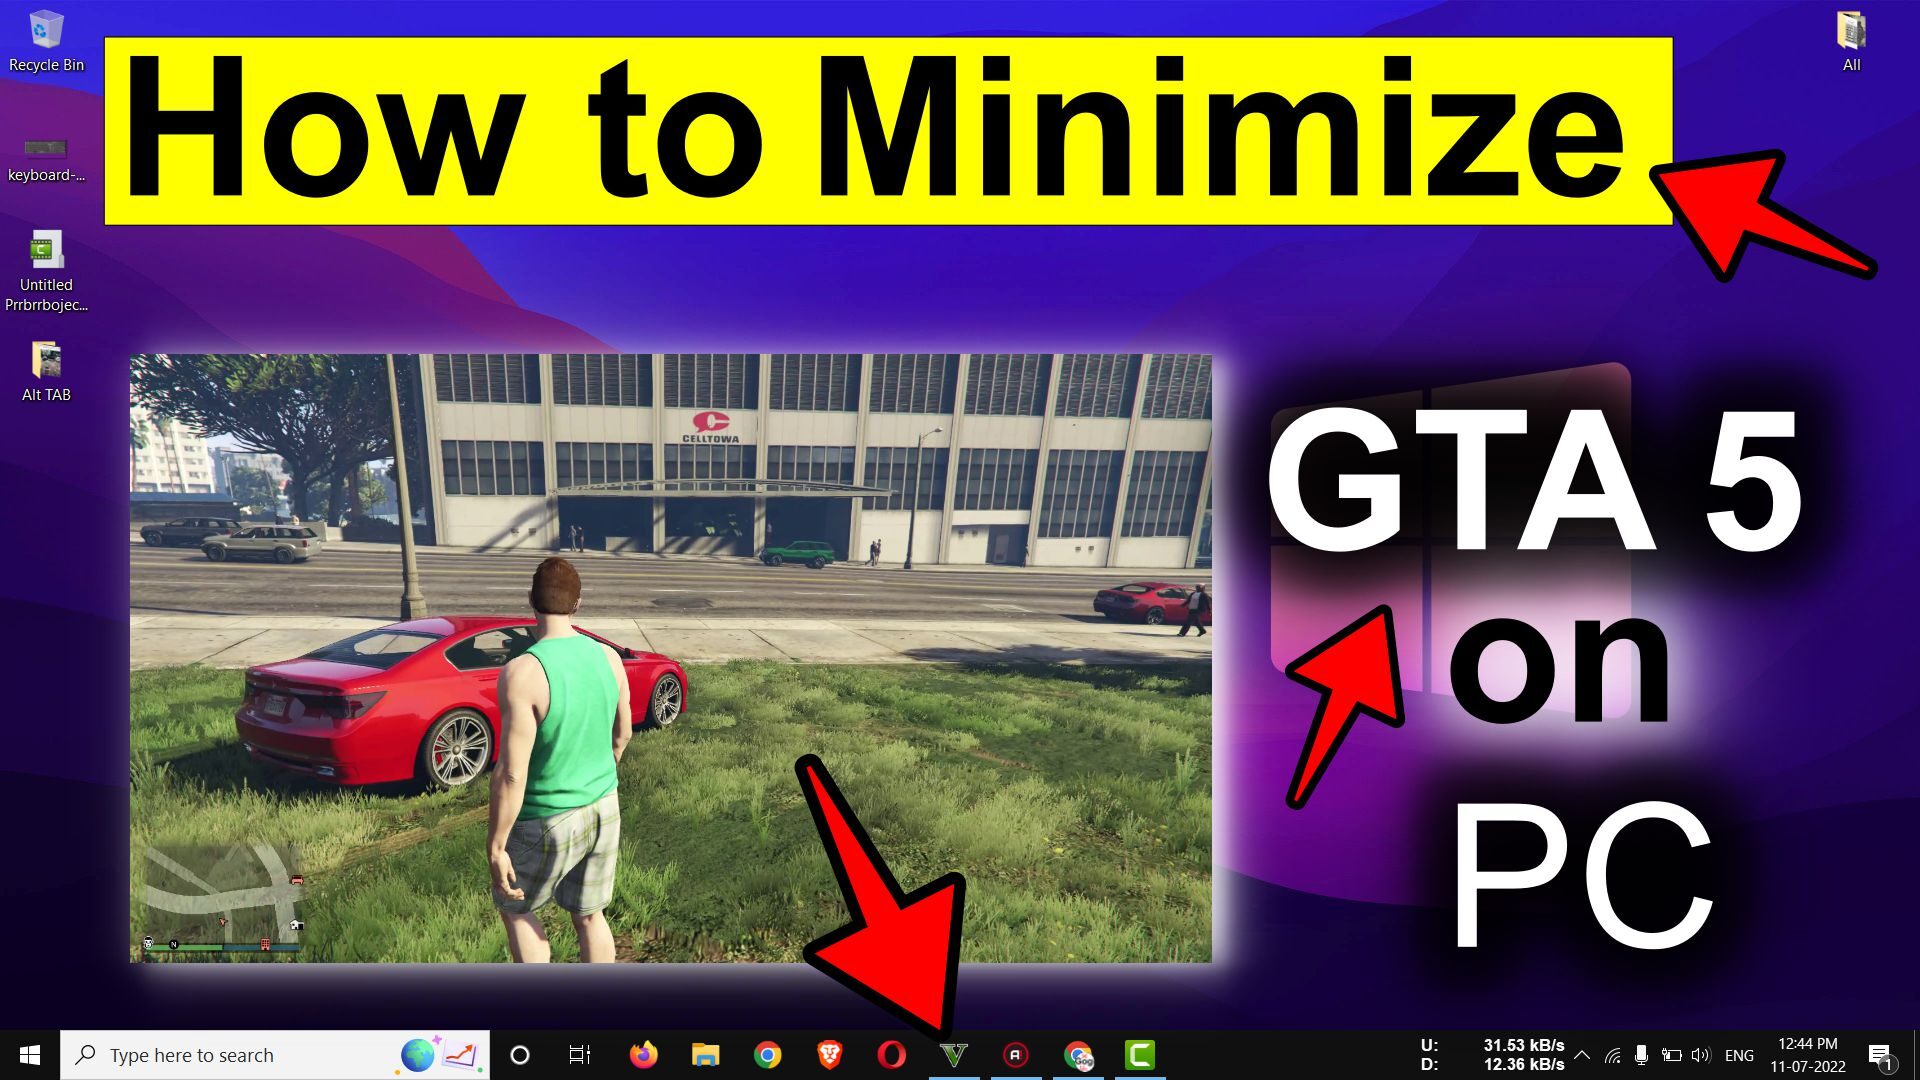 how to minimize GTA 5 on PC